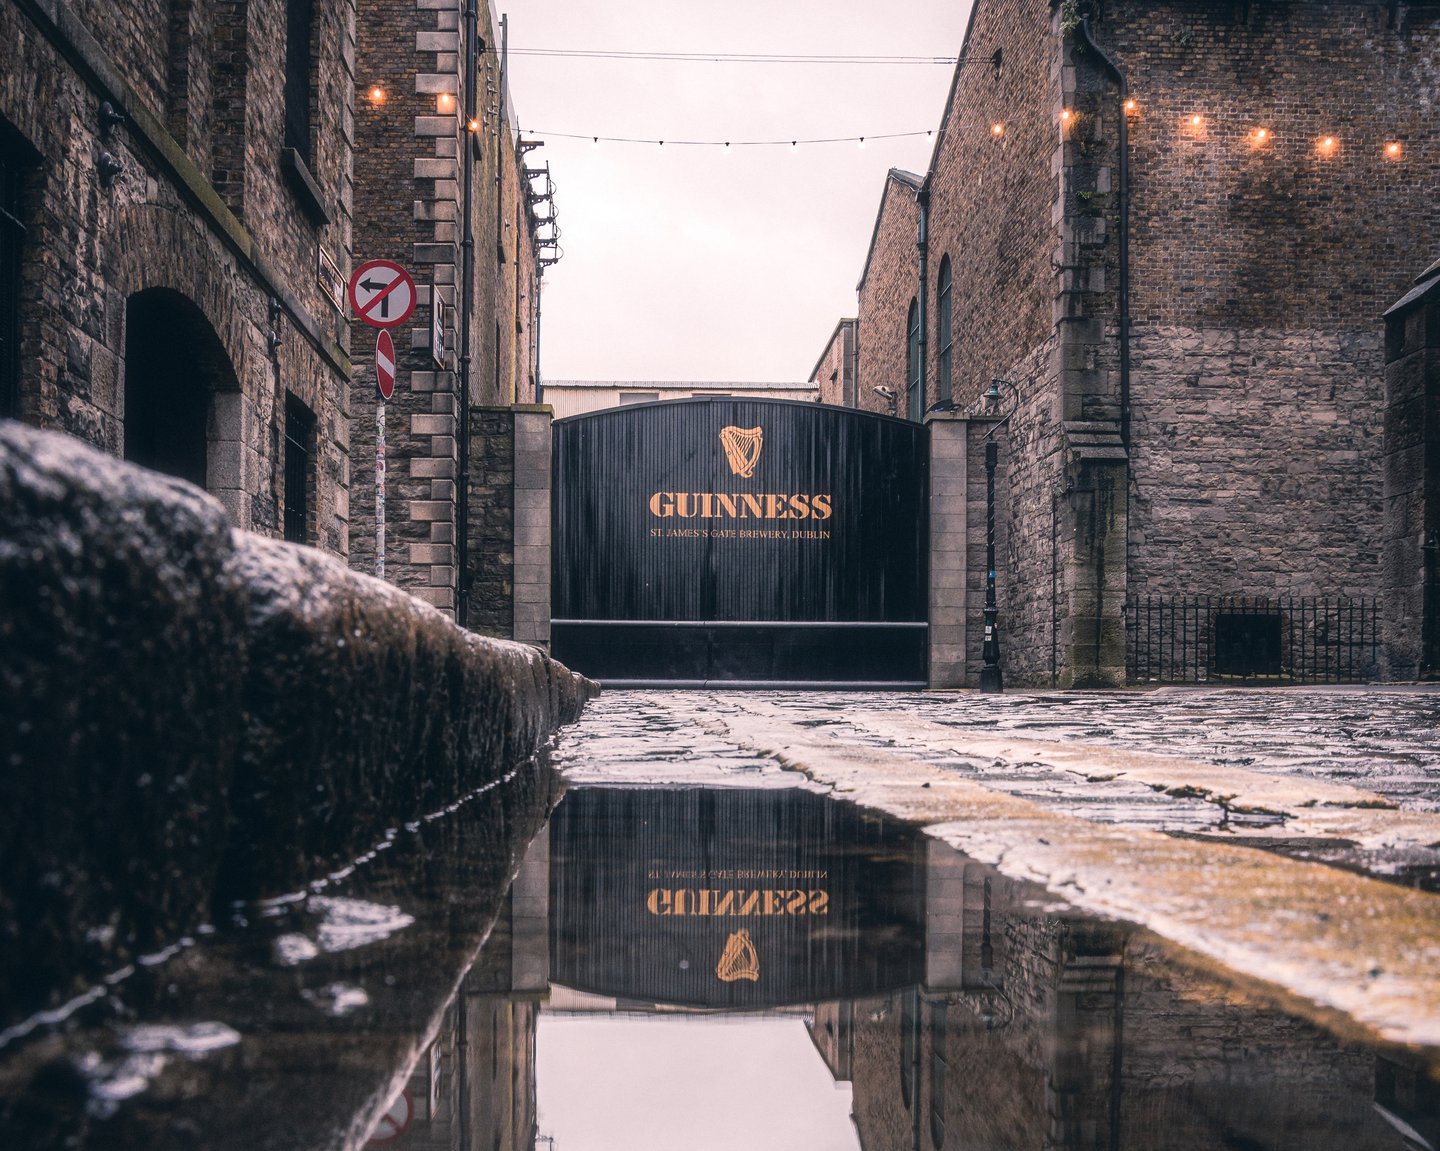 Iconic front gates at the Guinness STorehouse in Dublin, with puddle in foreground showing the gates' reflection